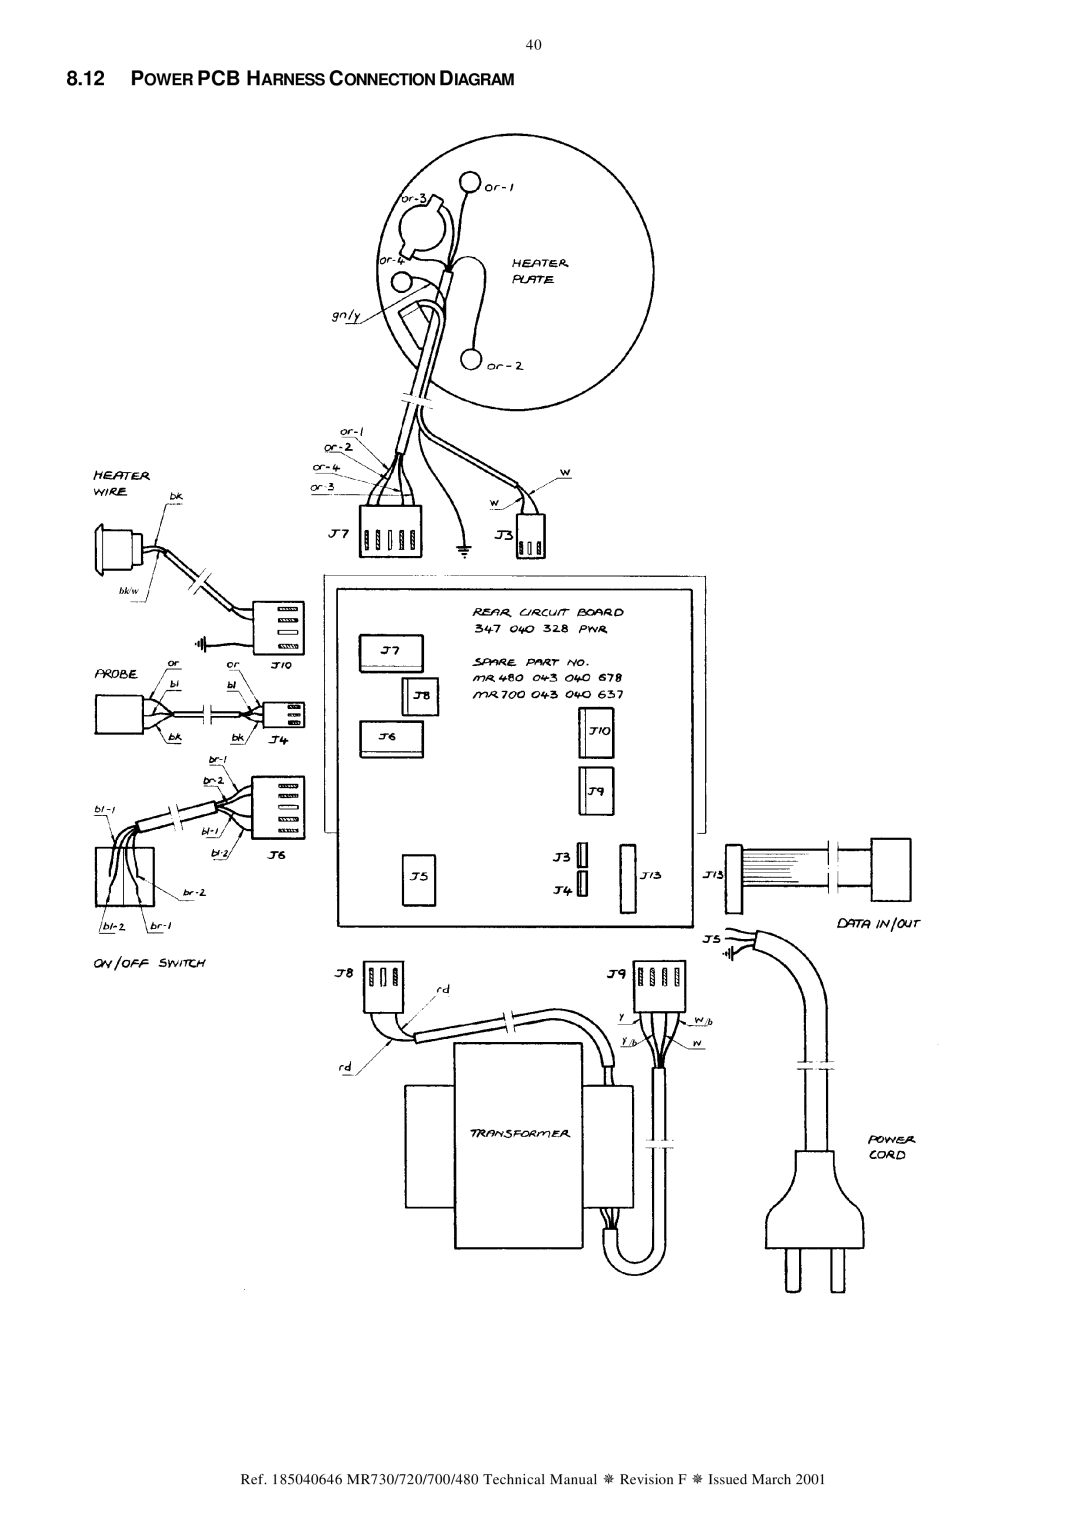 Fisher & Paykel MR480, MR720, MR730, MR700 technical manual Power PCB Harness Connection Diagram 